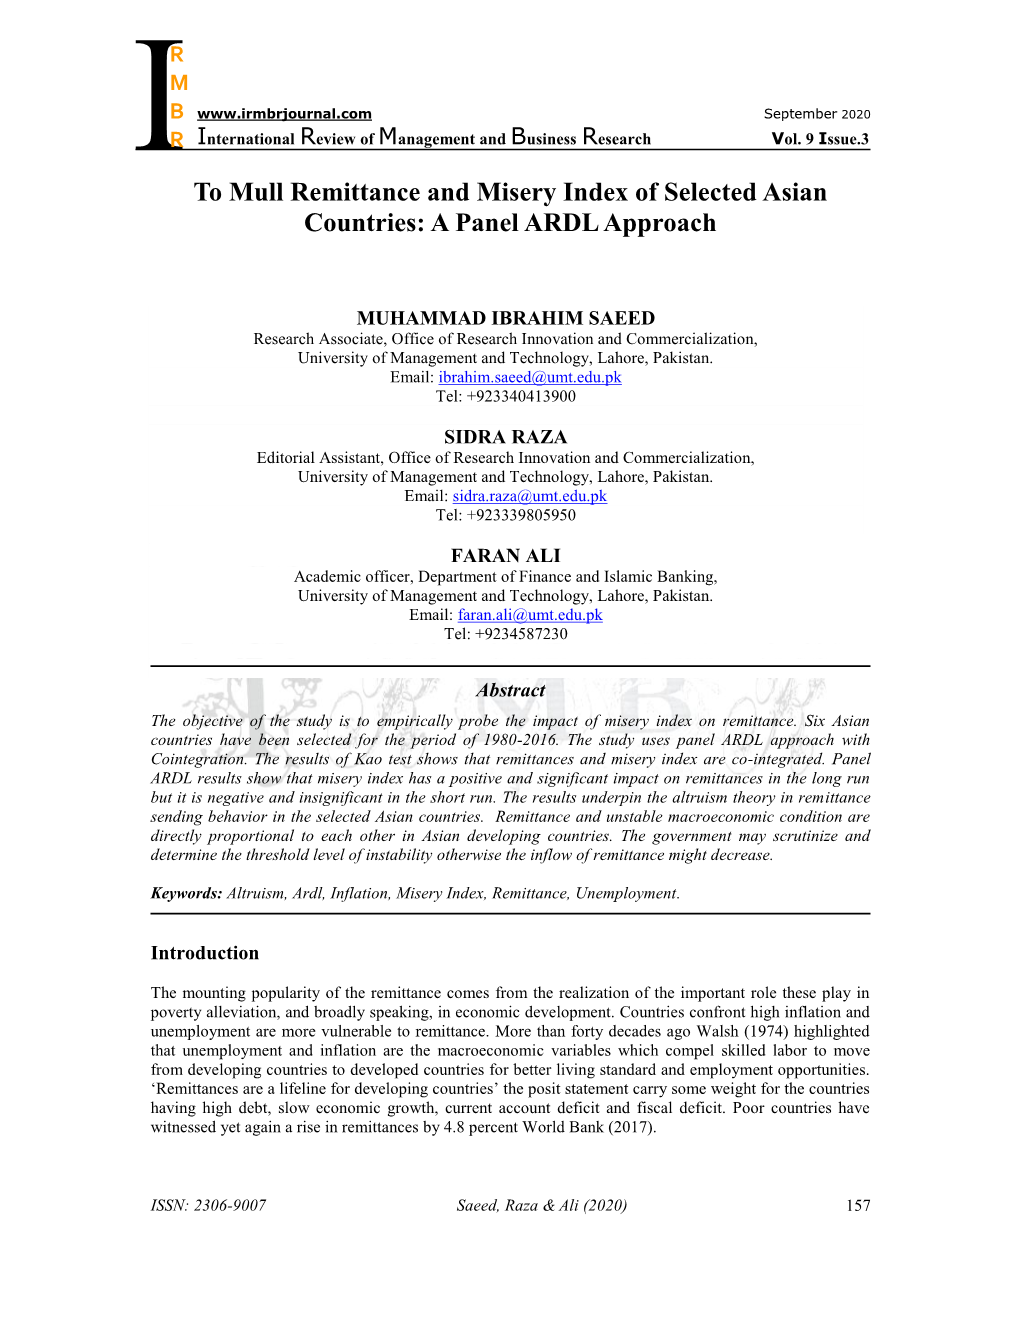 To Mull Remittance and Misery Index of Selected Asian Countries: a Panel ARDL Approach